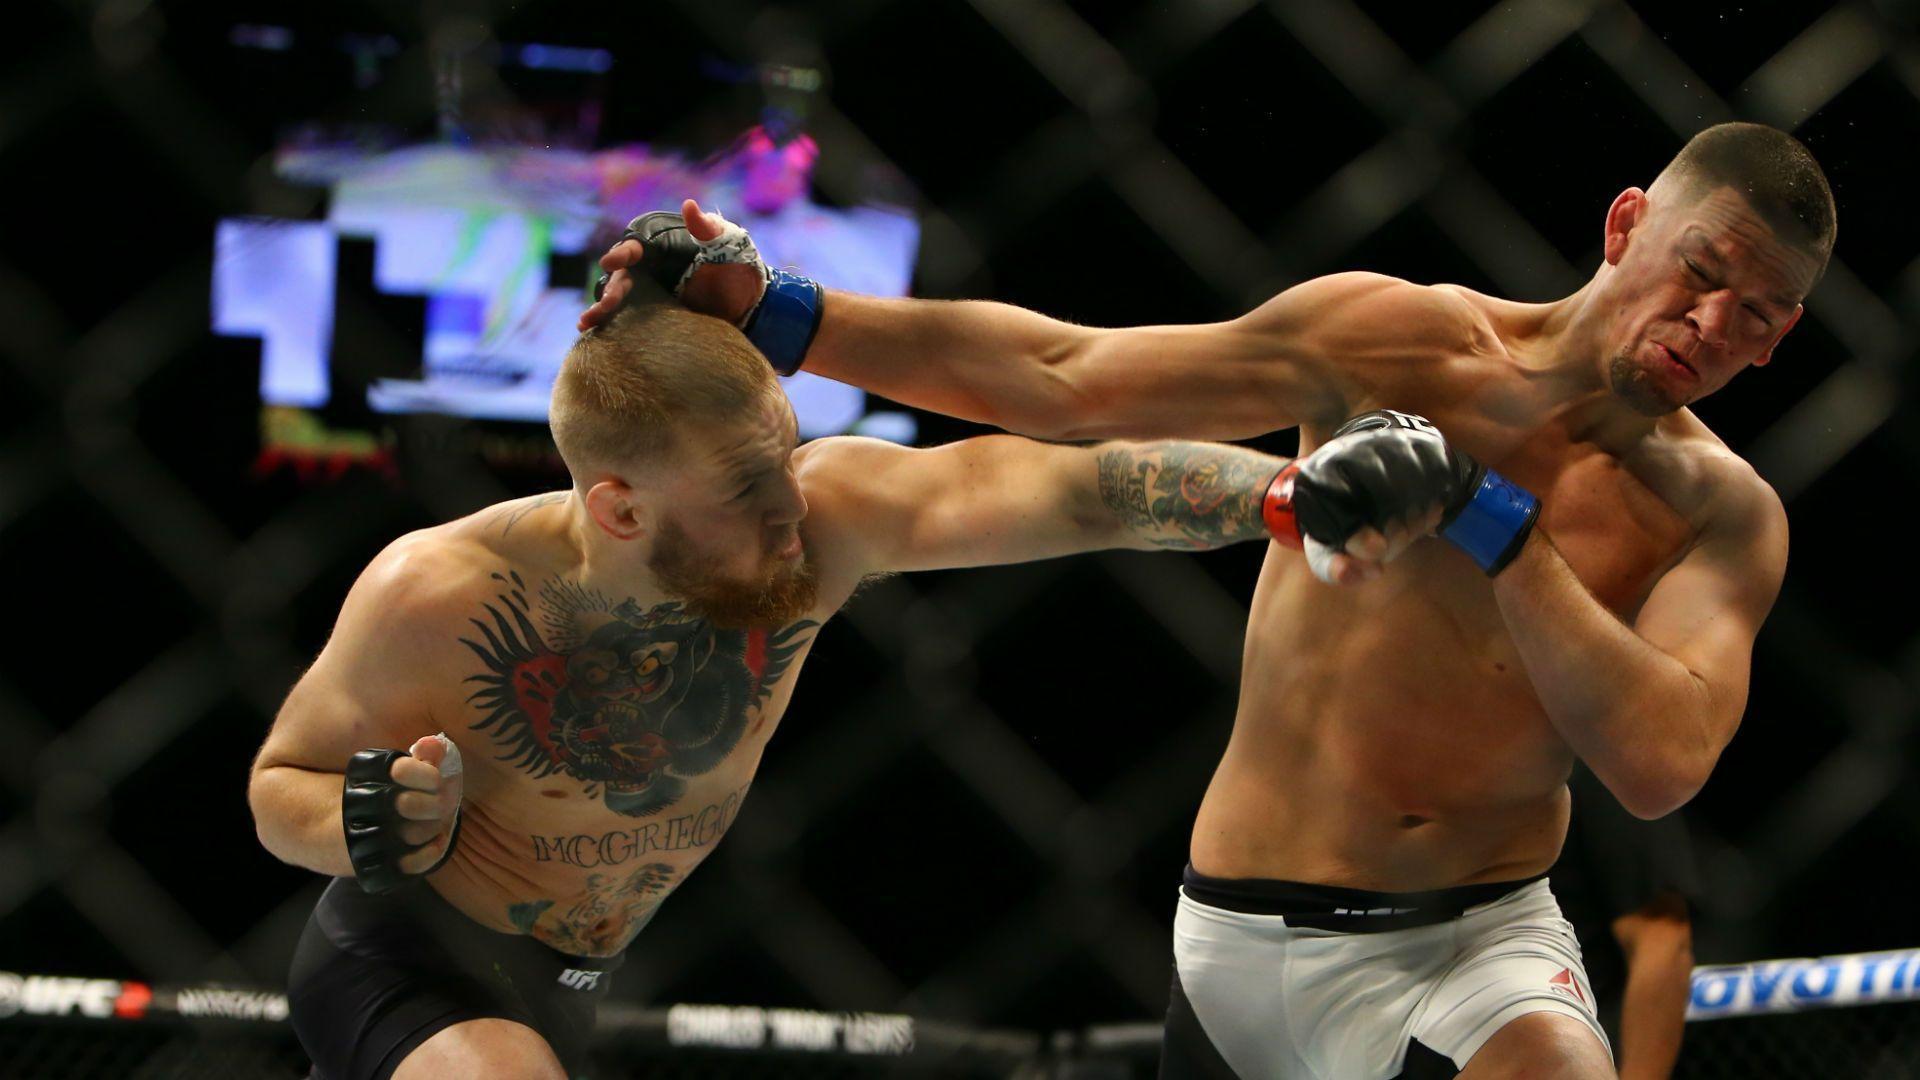 Other. Conor McGregor, Nate Diaz rematch scheduled for UFC 202